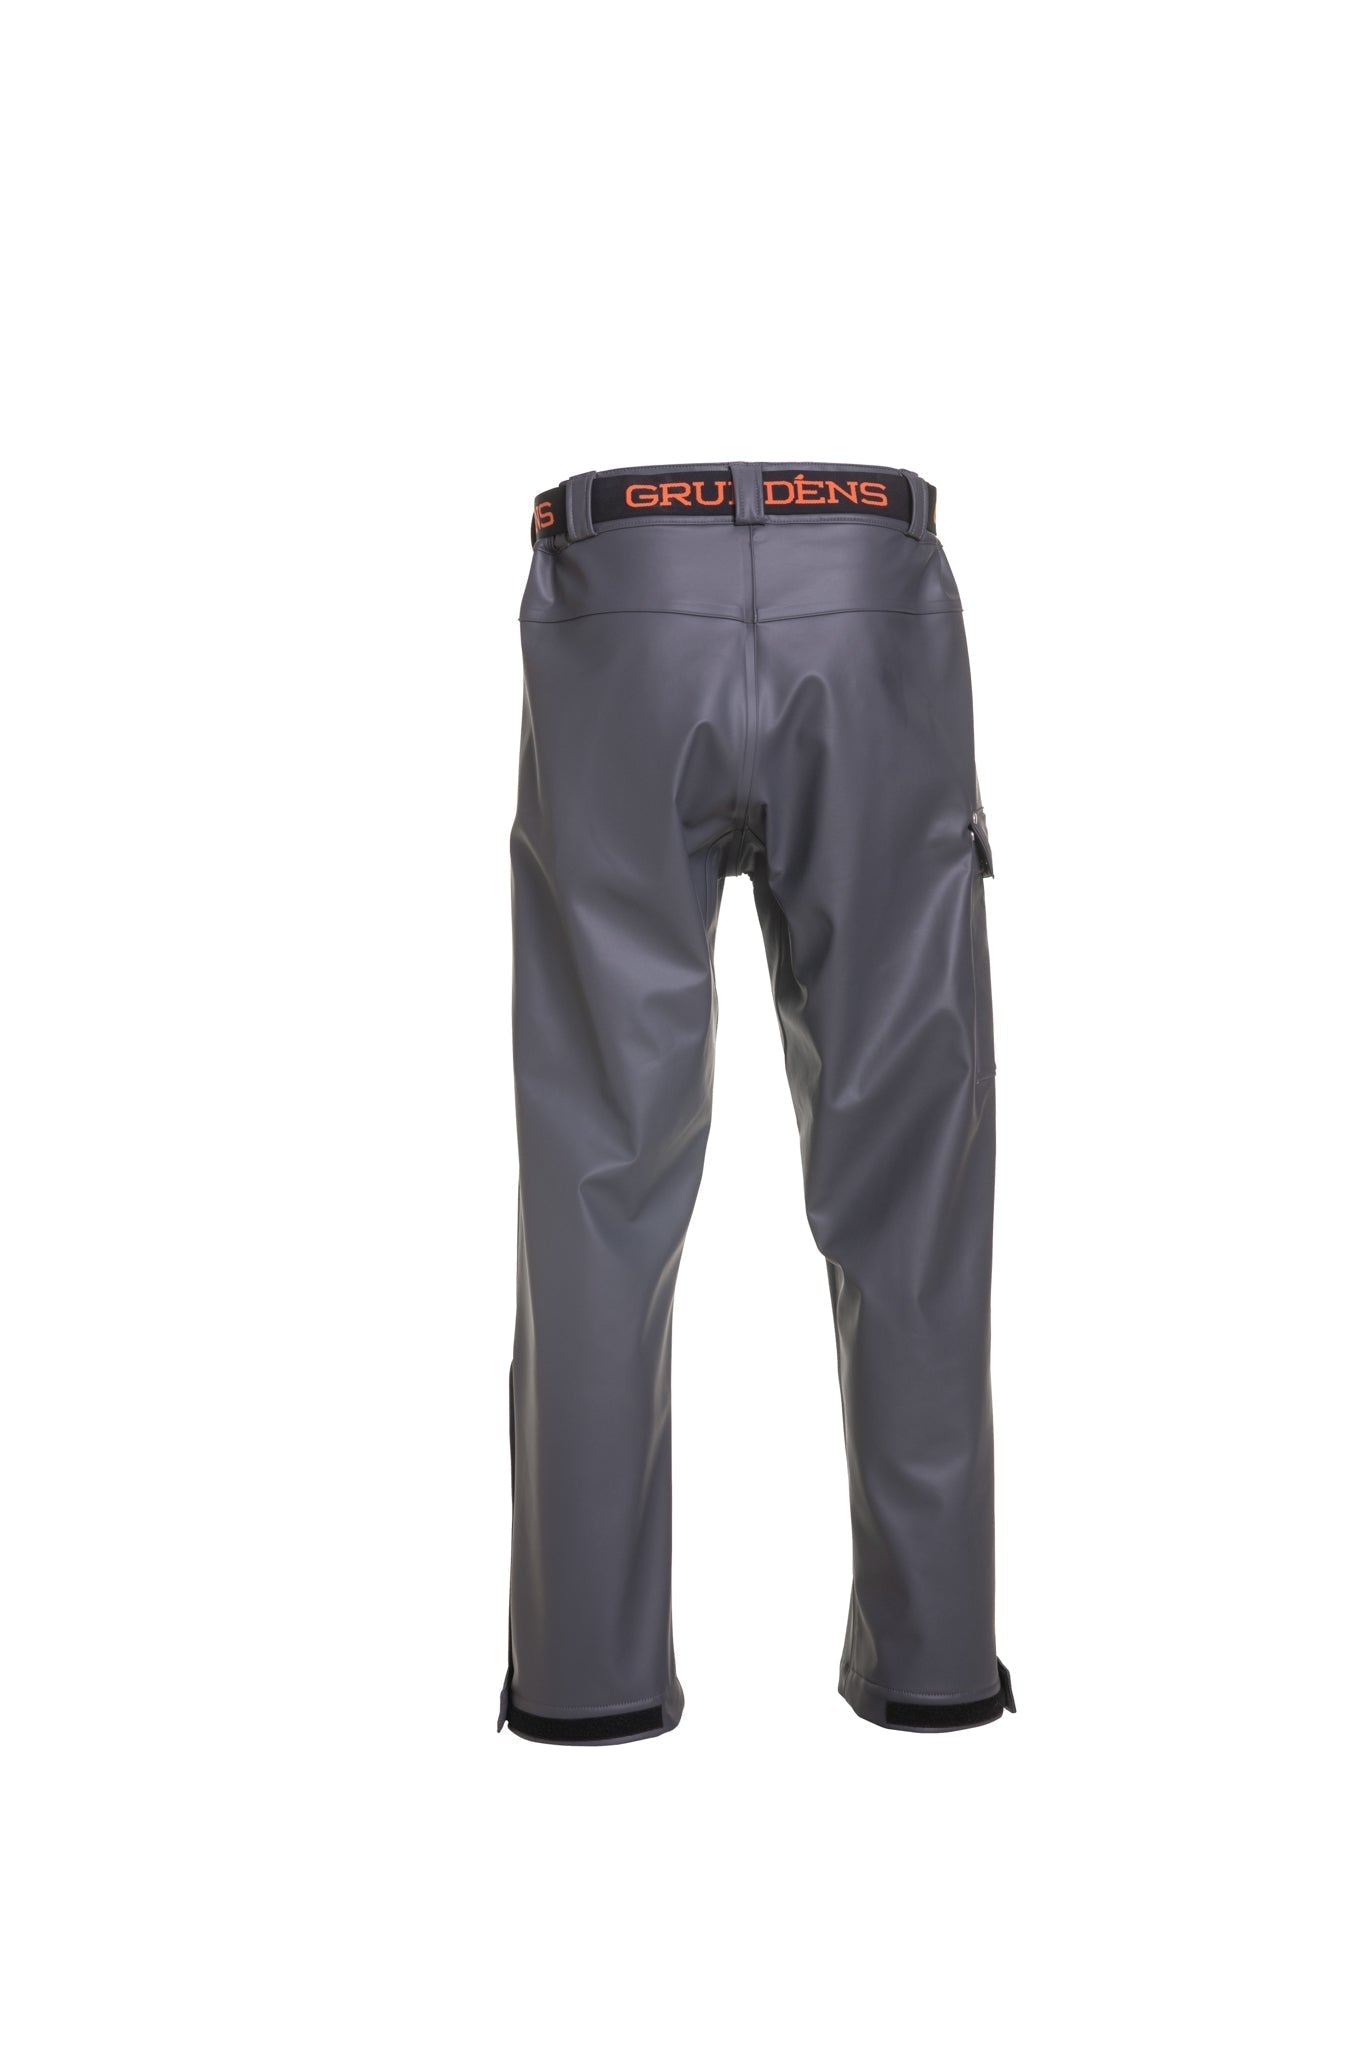 Grundens Neptune Thermo Pant - 2XL